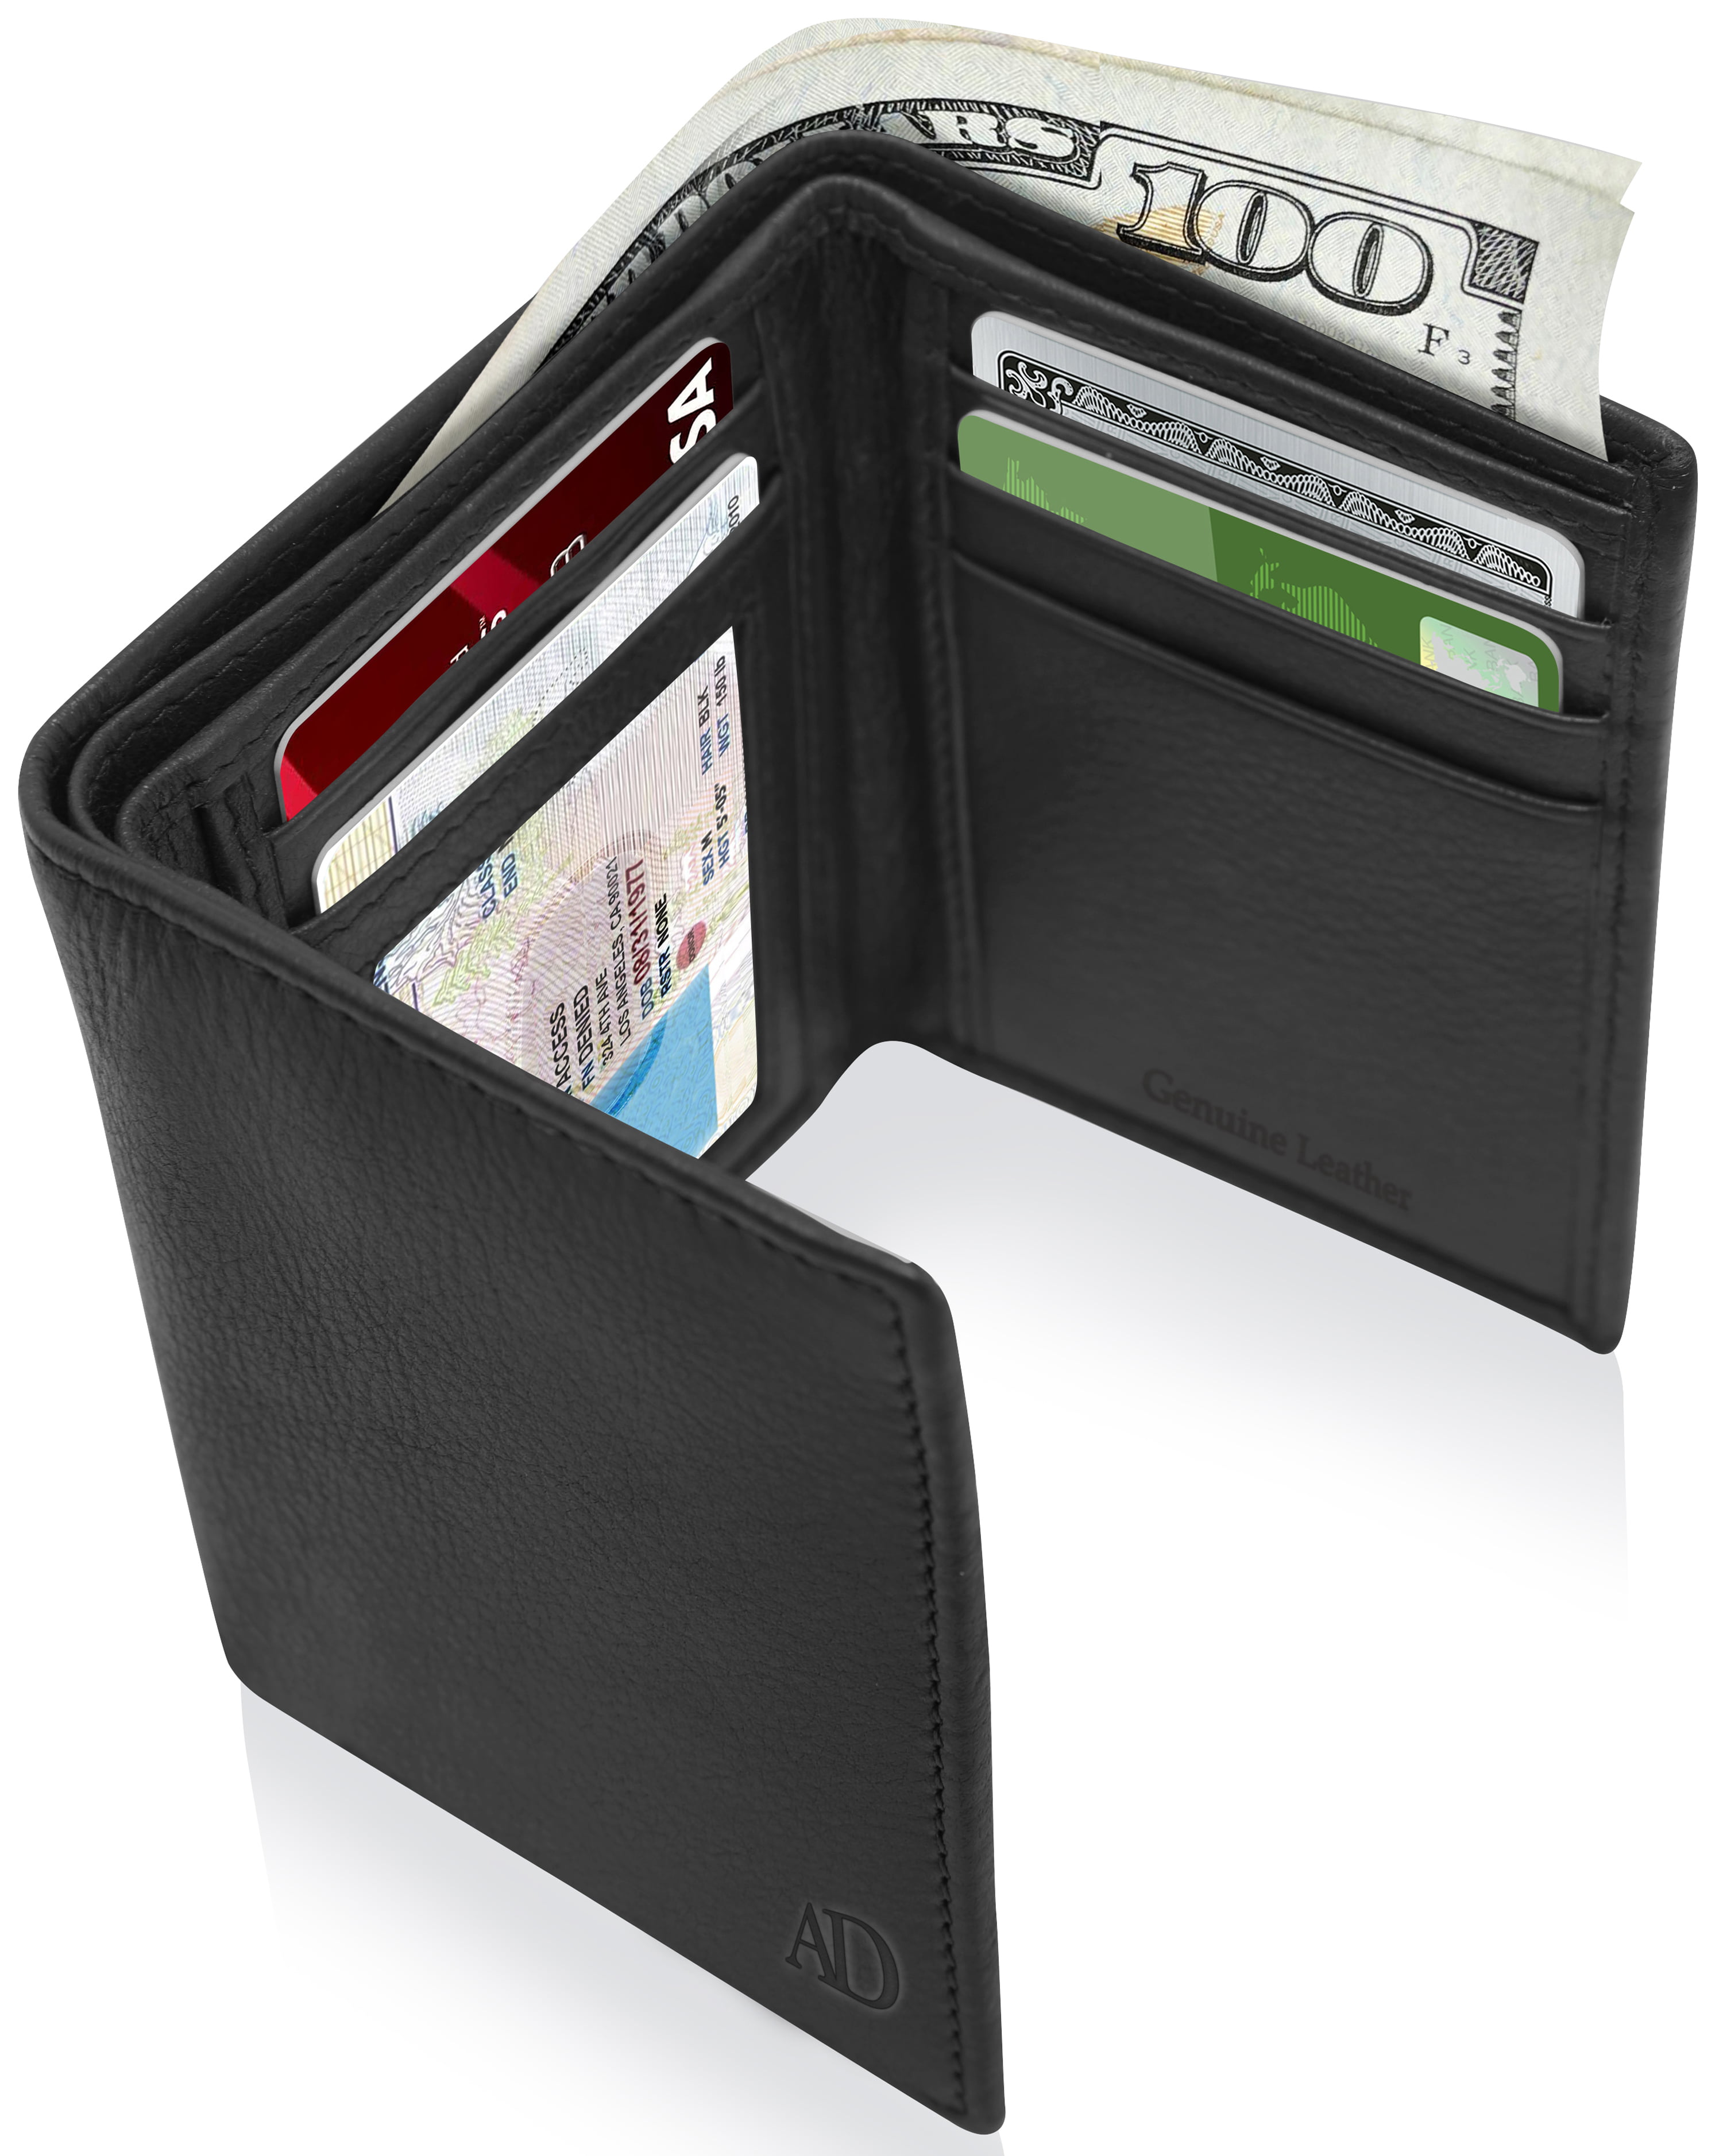 Genuine Leather Wallets For Men - Trifold Mens Wallet With ID Window RFID Blocking - www.bagsaleusa.com/louis-vuitton/